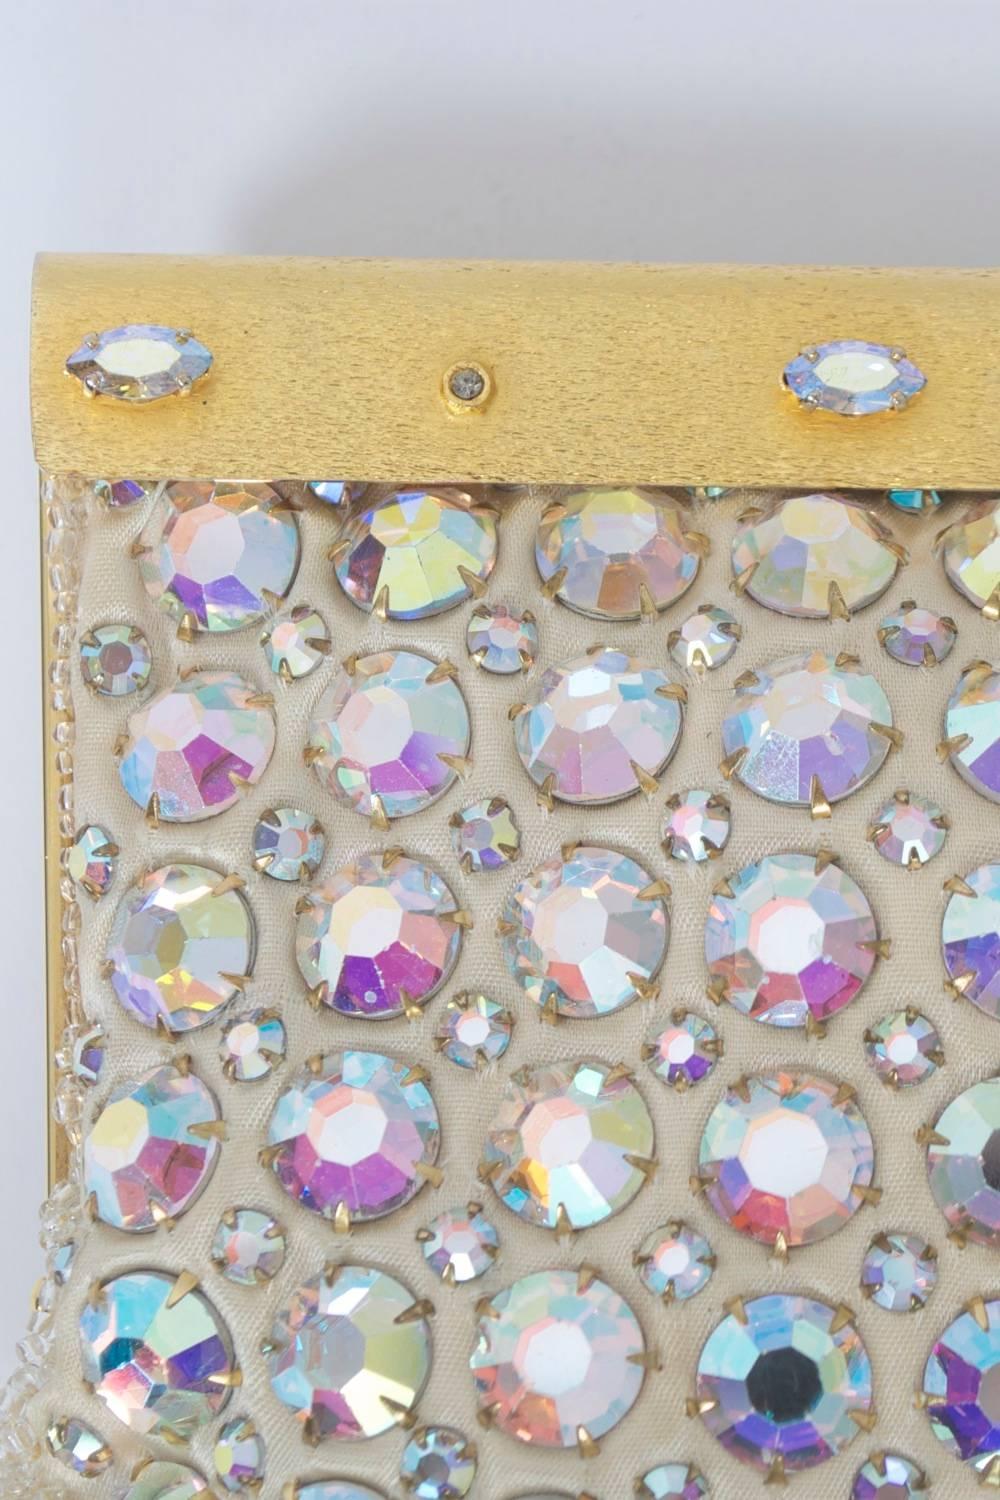 Glamorous evening clutch featuring large ABA rhinestones on a white ground. Satin finish gold metal hinged frame with matching rhinestones alternating in marquise and small rounds. Ivory satin interior with unused mirror in side comartment. Marked